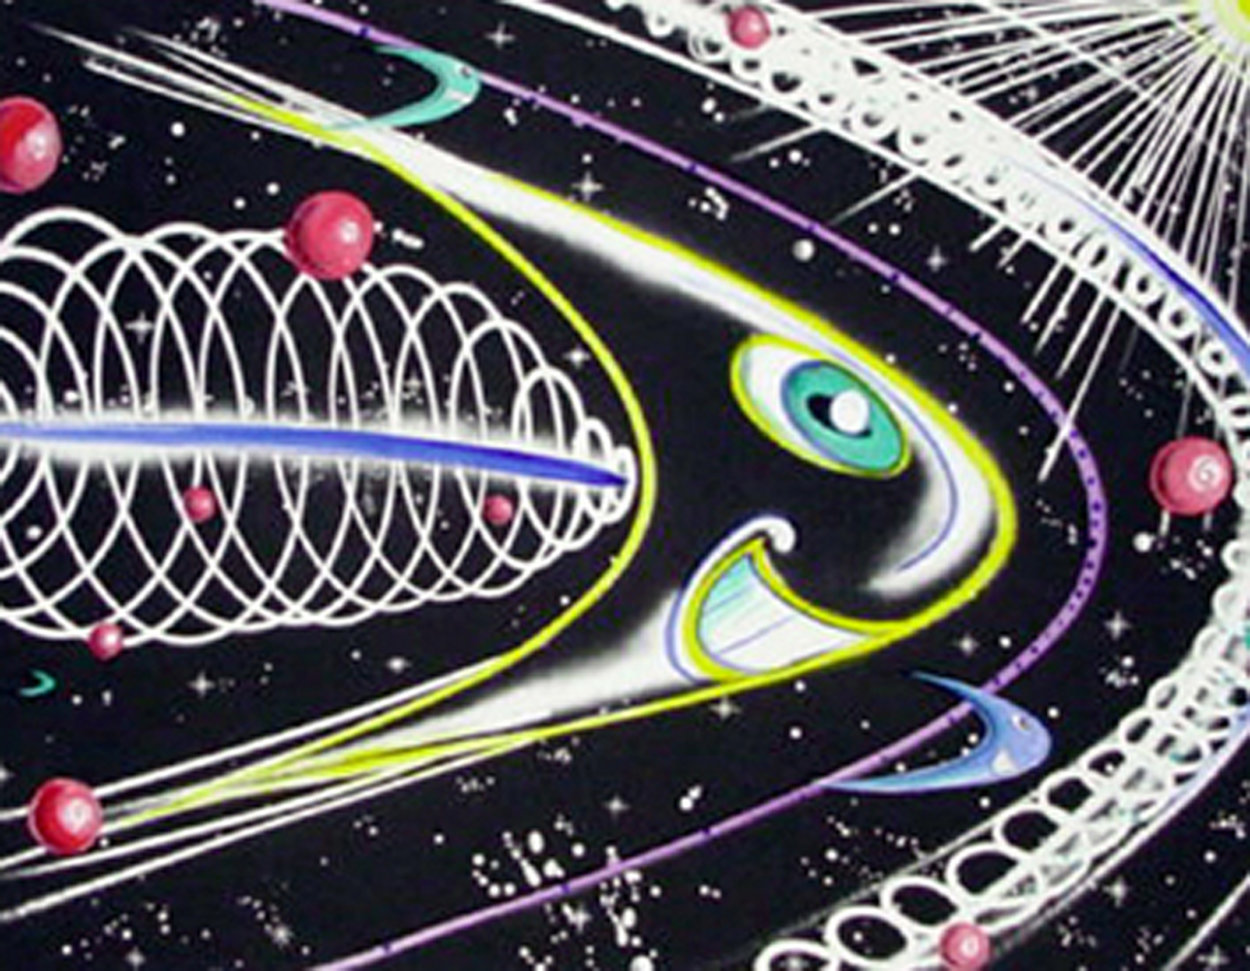 Space Traveler Hand Painted Monoprint 2011 45x55 Huge Works on Paper (not prints) by Kenny Scharf